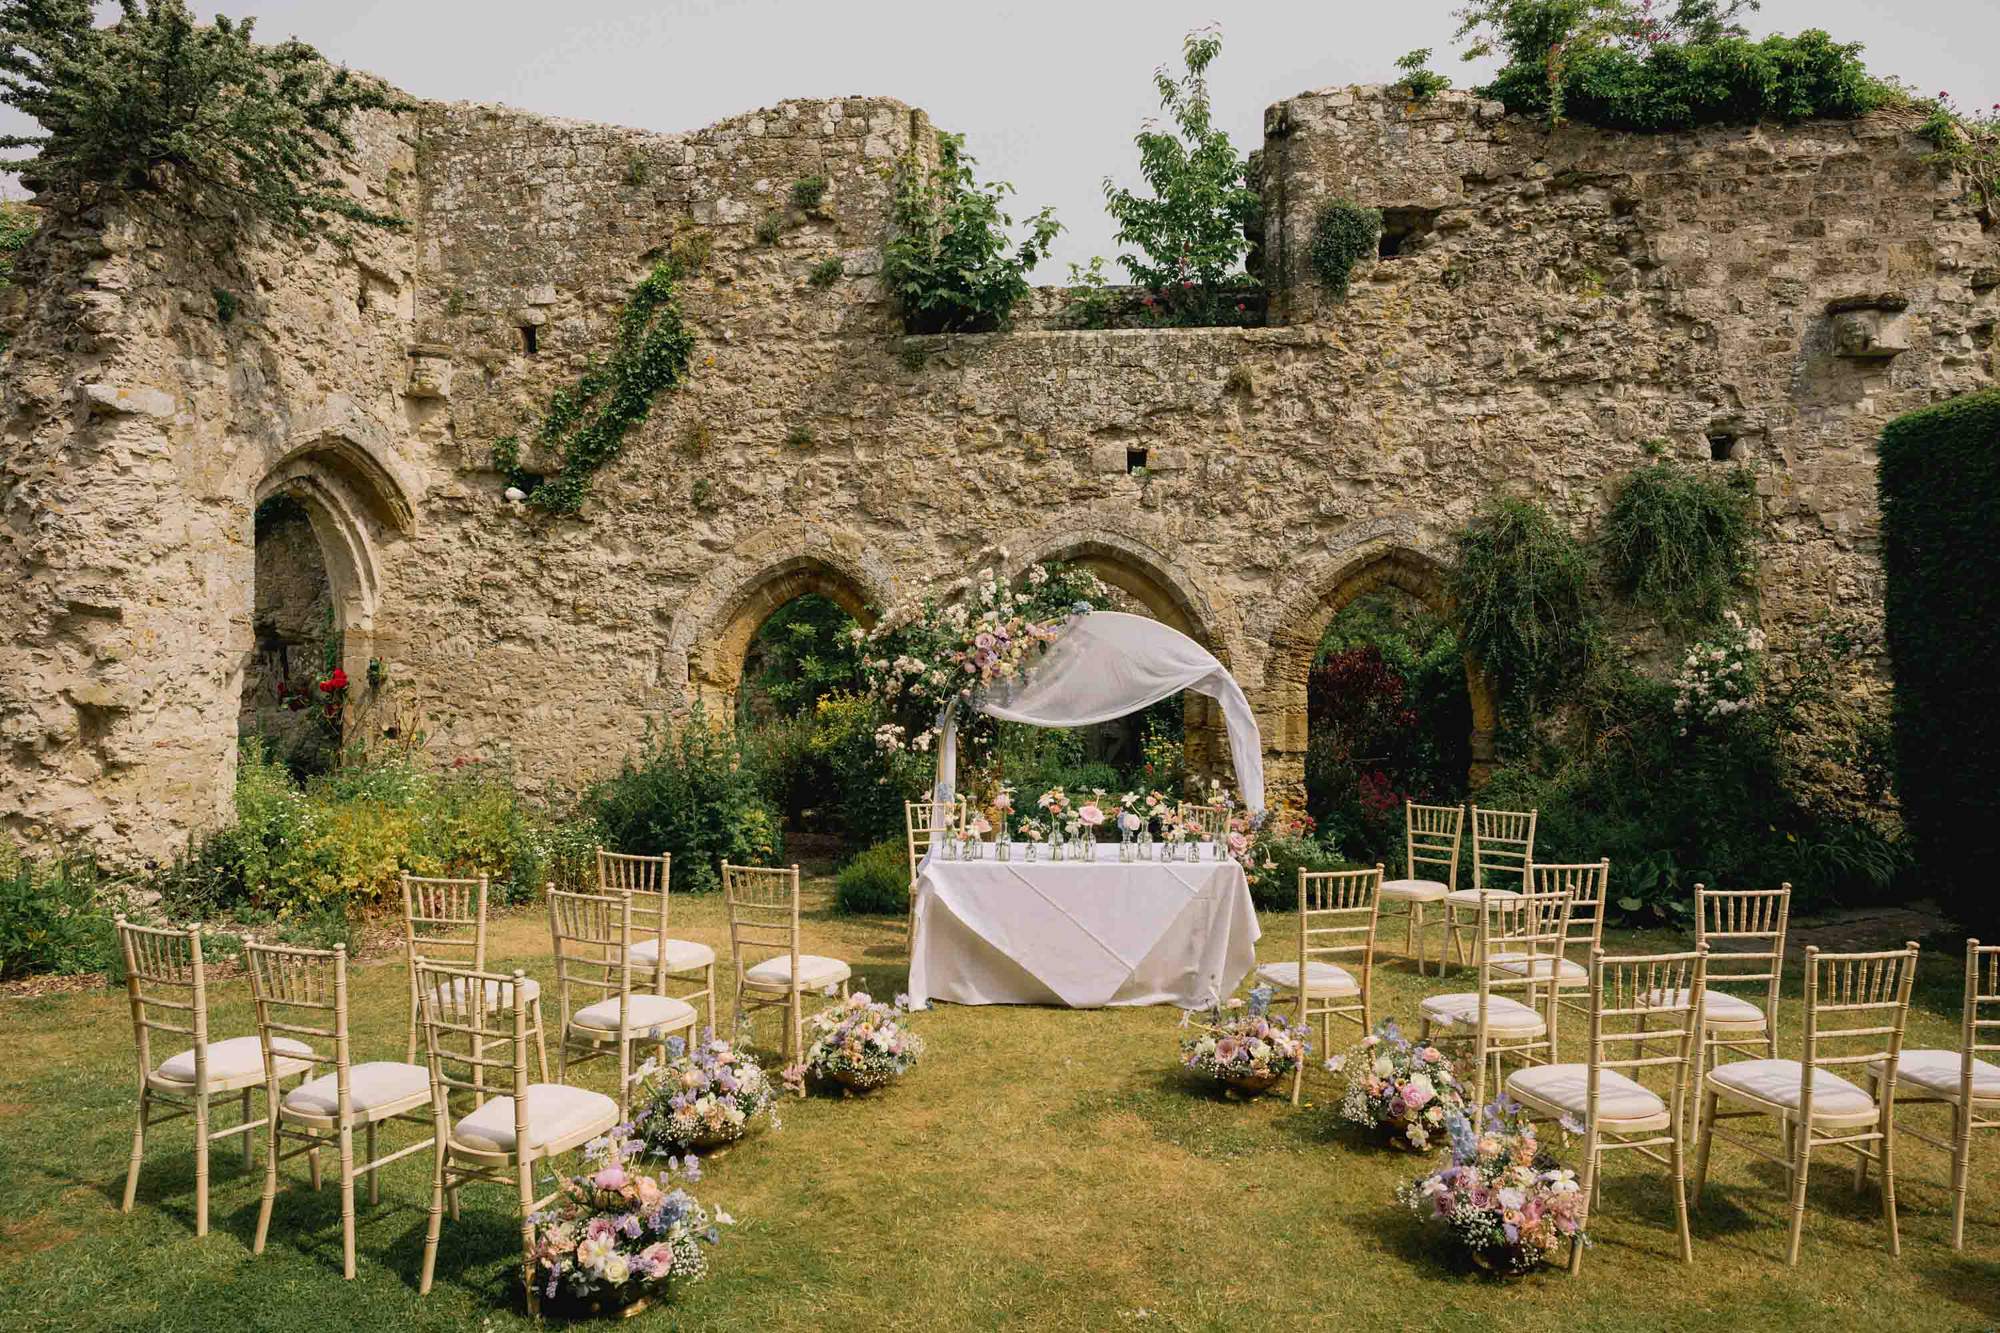 Pretty wedding ceremony set up in the garden at Amberley Castle in West Sussex.